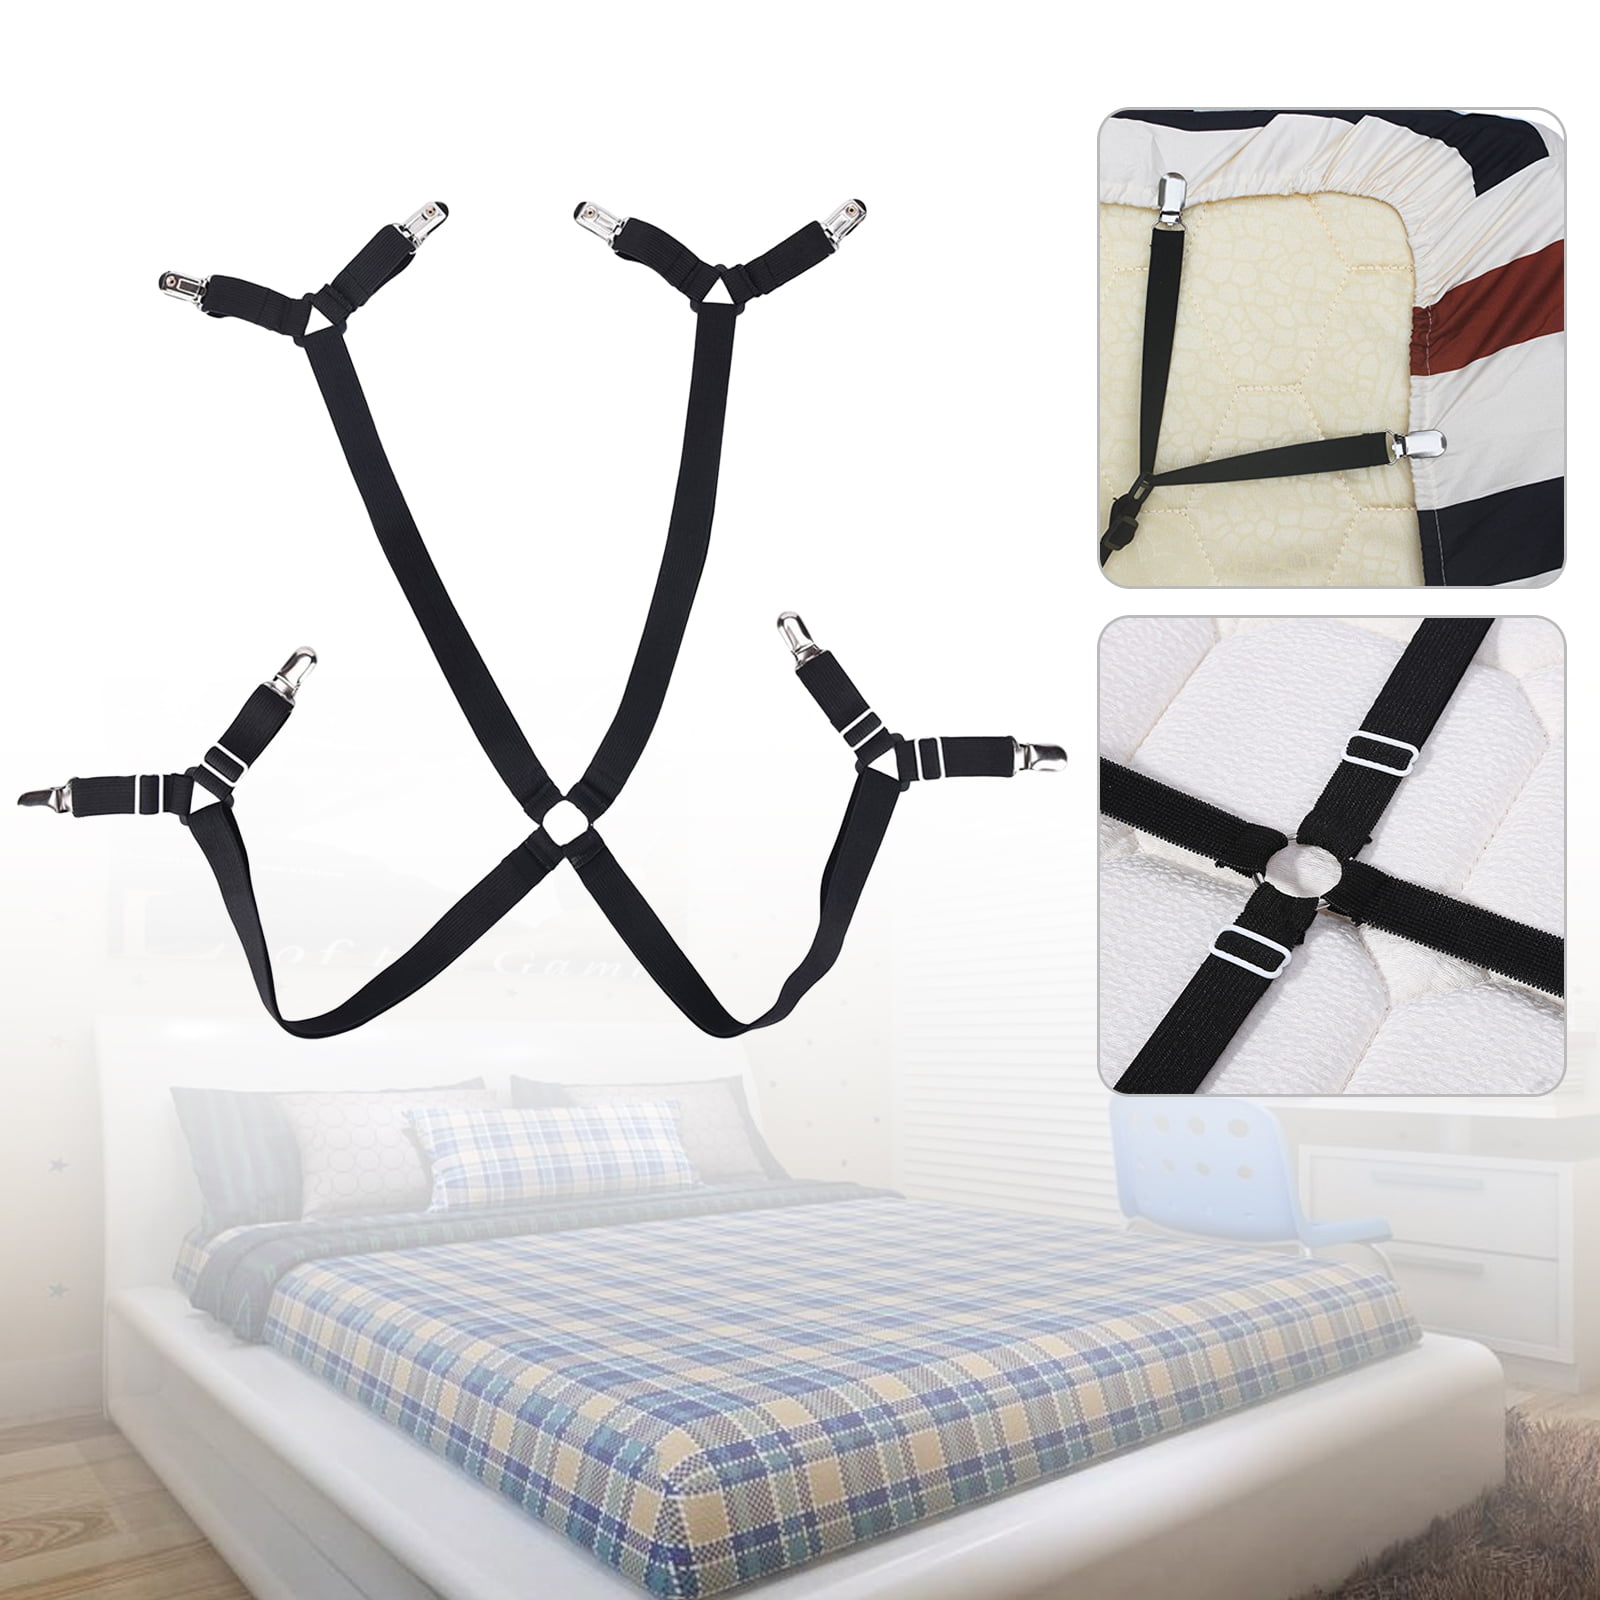 Crisscross Adjustable Bed Mattress, How To Put Fitted Sheets On King Size Beds